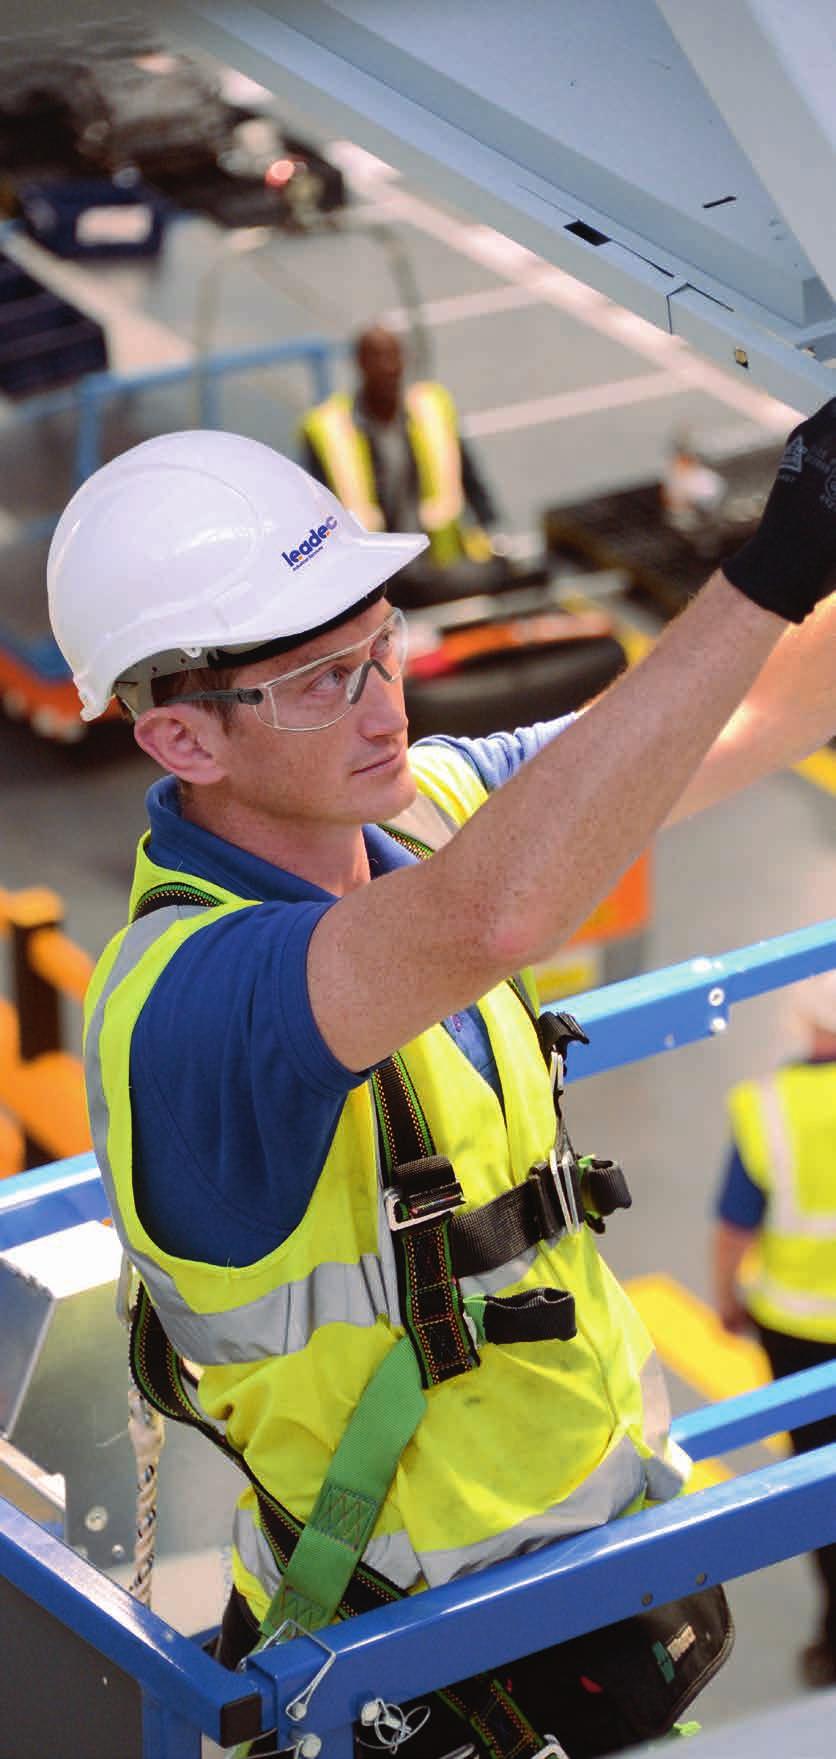 Who stands for quality and safety? We do at Leadec.